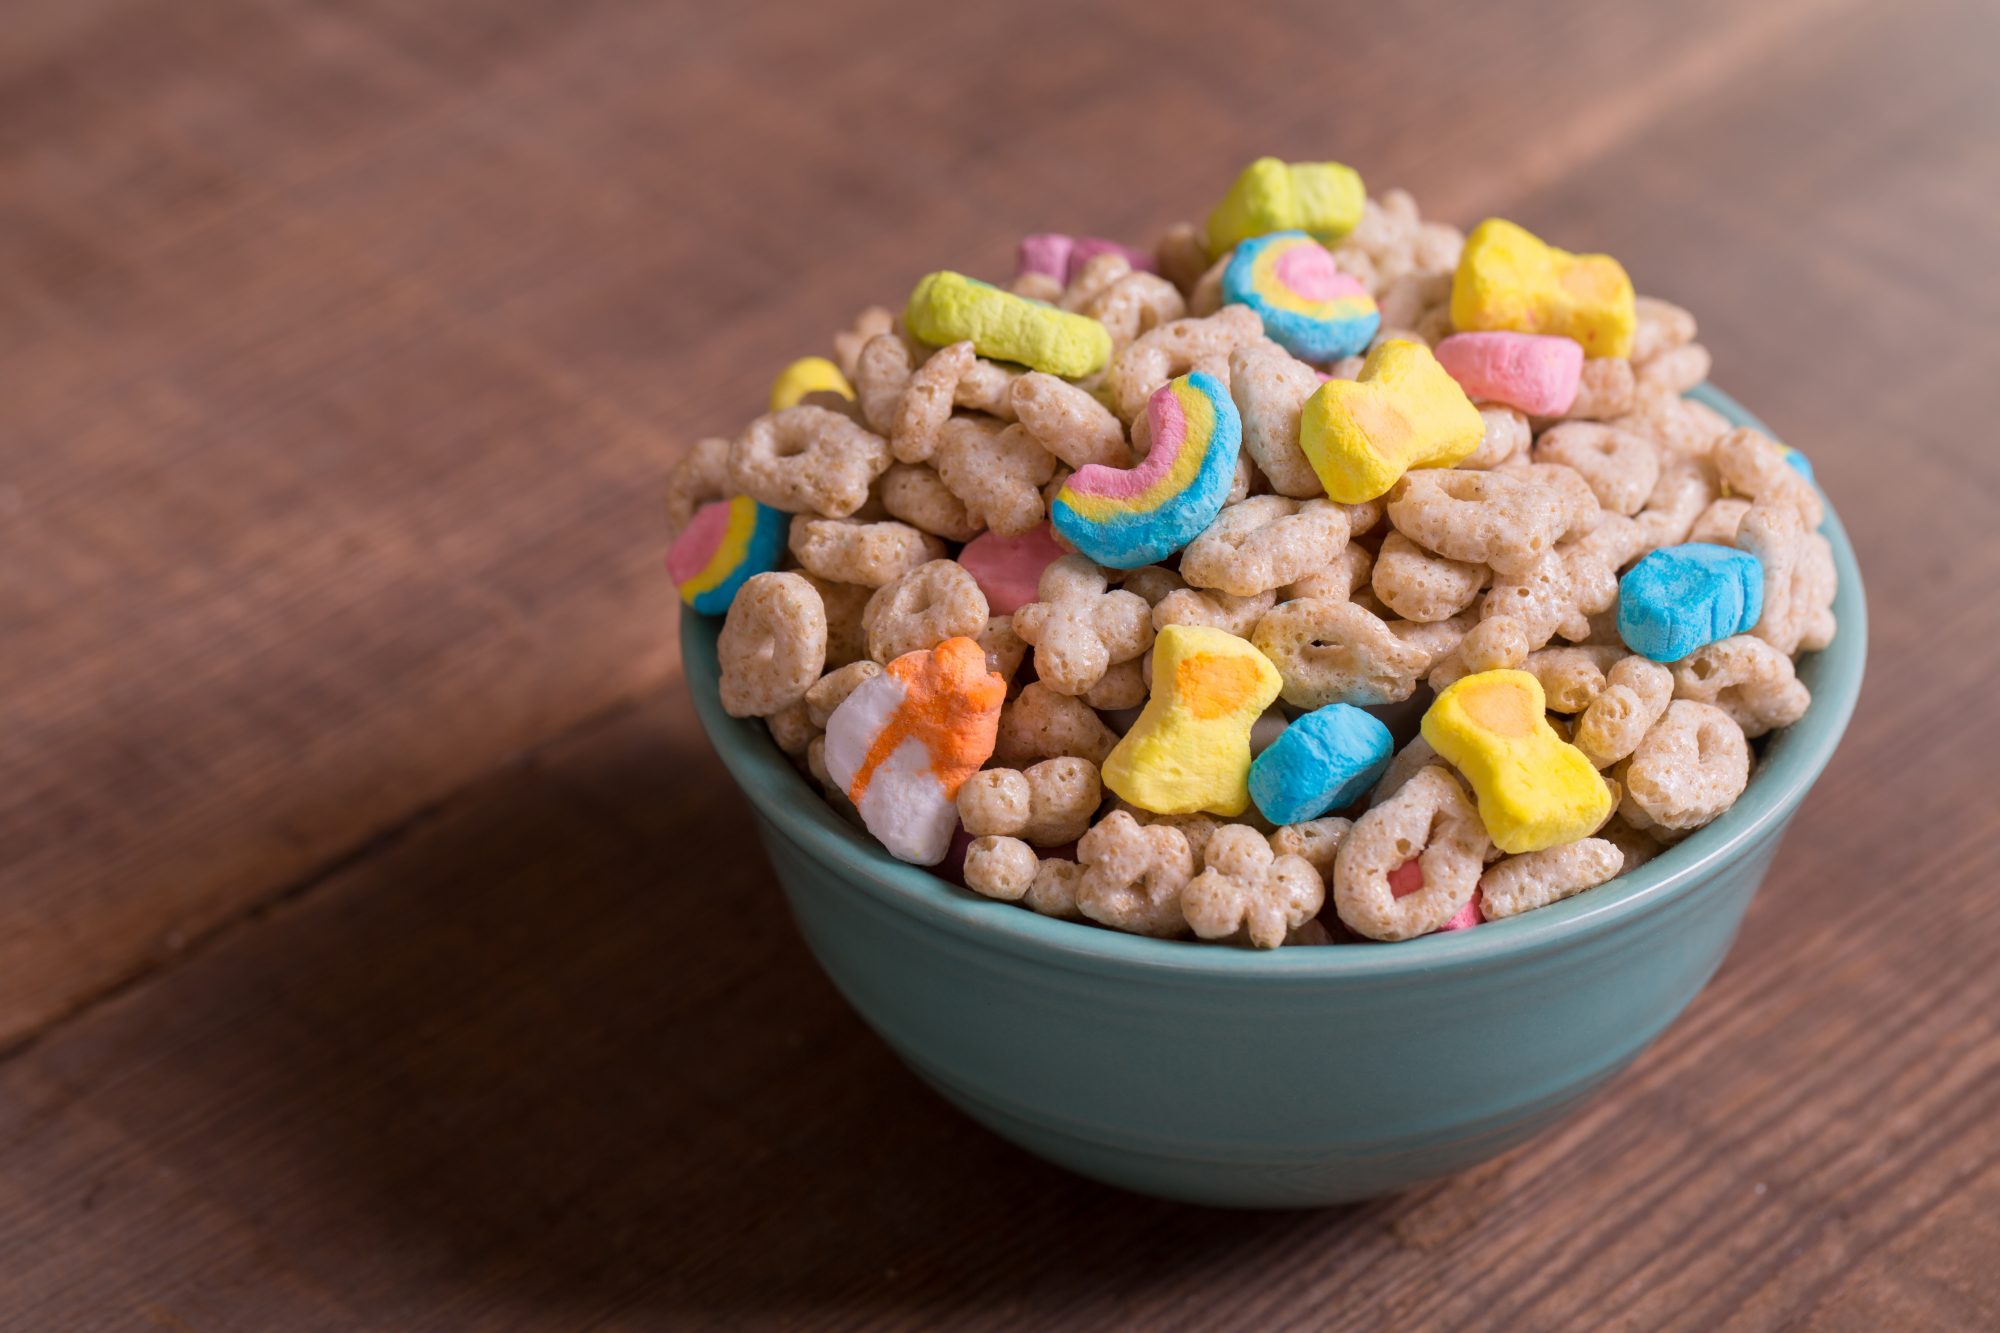 Lucky Charms Cereal 